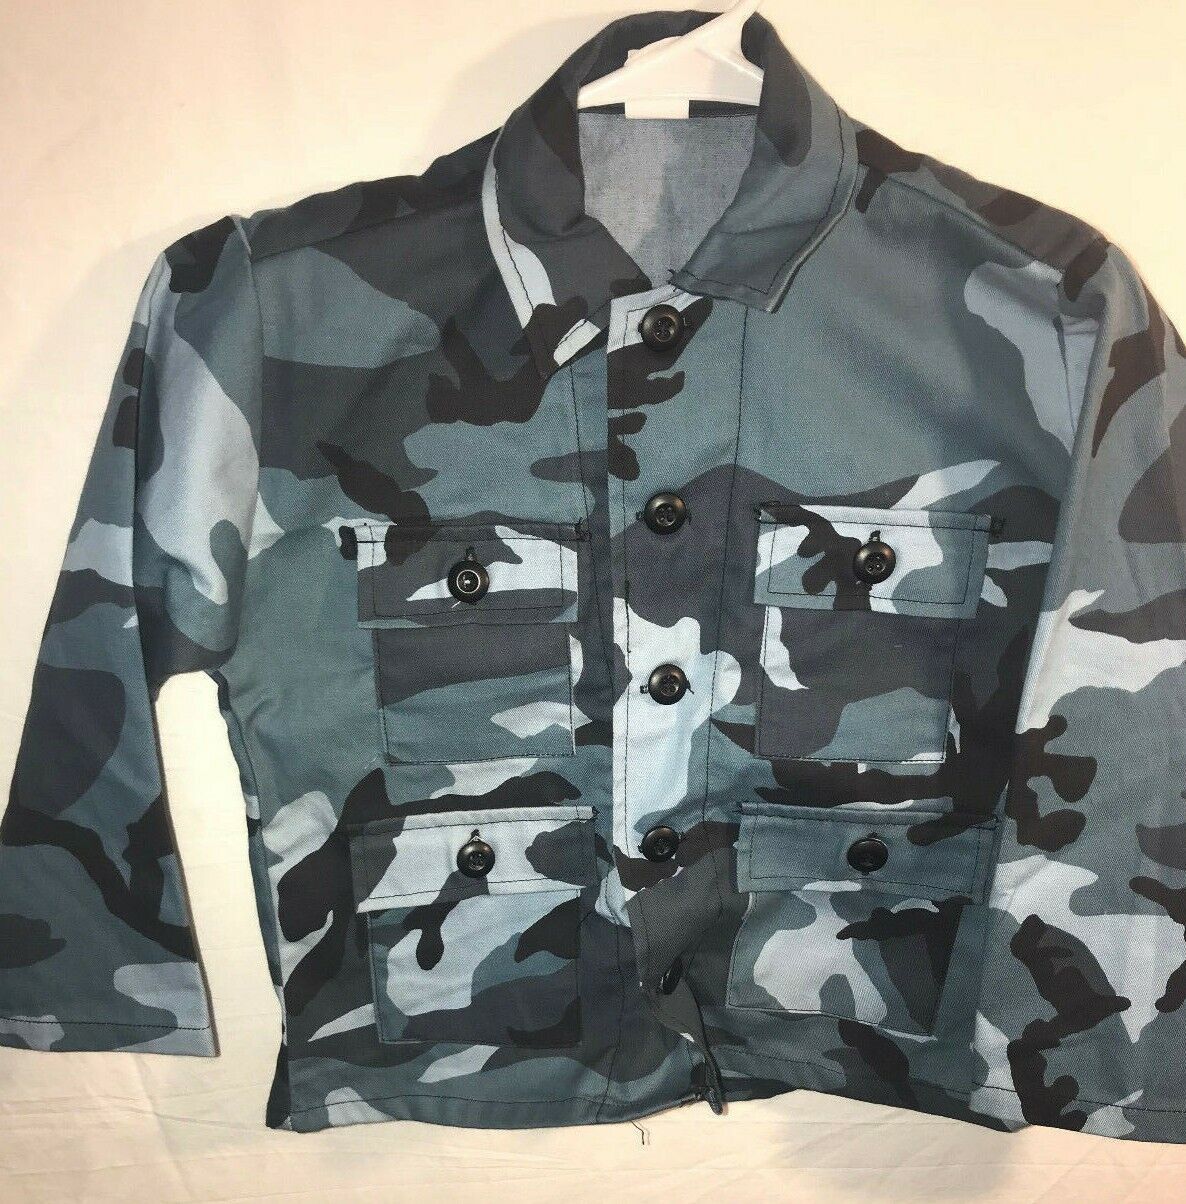 Primary image for NEW YOUTH MILITARY HUNTING PAINTBALL AIRSOFT JACKET ICE CAMOUFLAGE BLUE SKY 